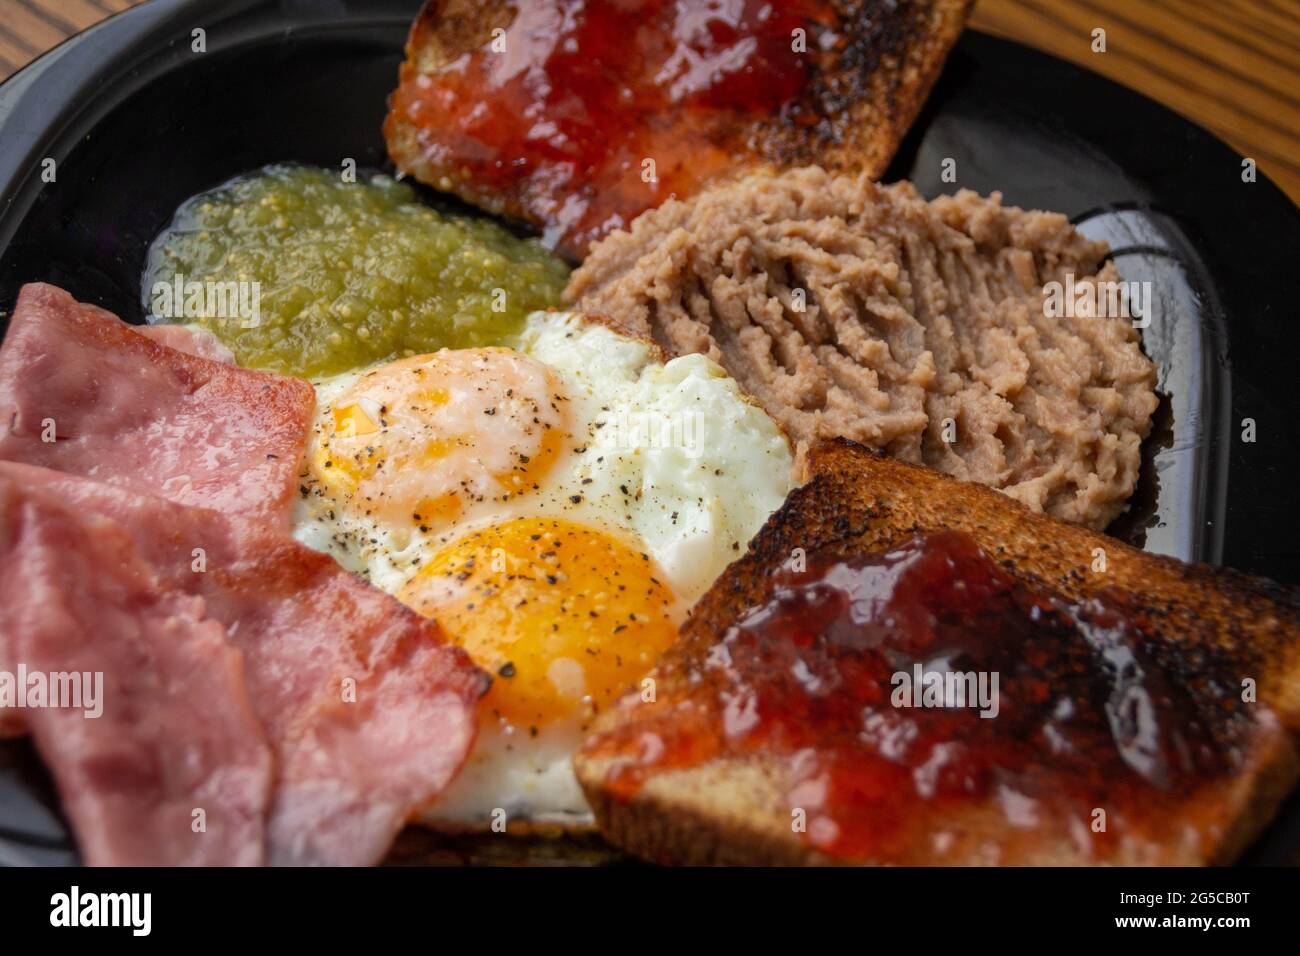 Photograph of a pair of fried eggs with beans, jam and bread with jam Stock Photo